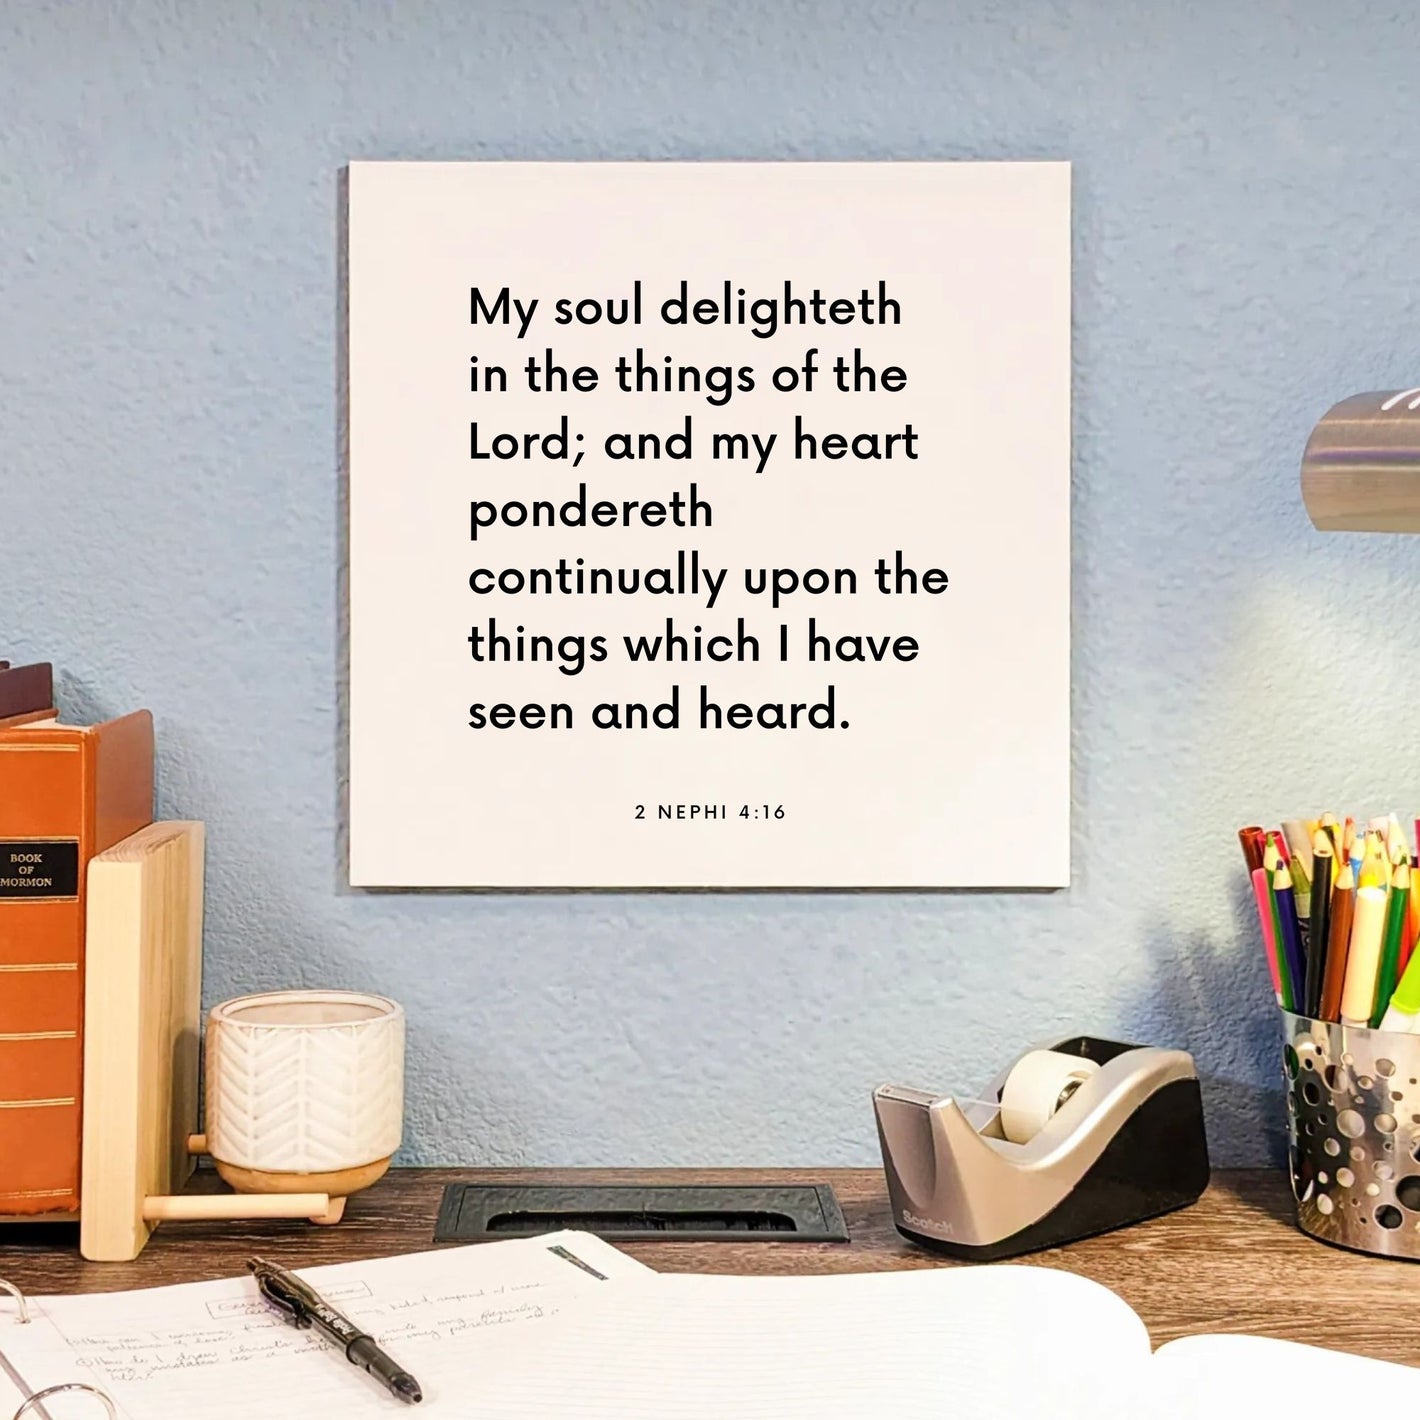 Desk mouting of the scripture tile for 2 Nephi 4:16 - "My soul delighteth in the things of the Lord"